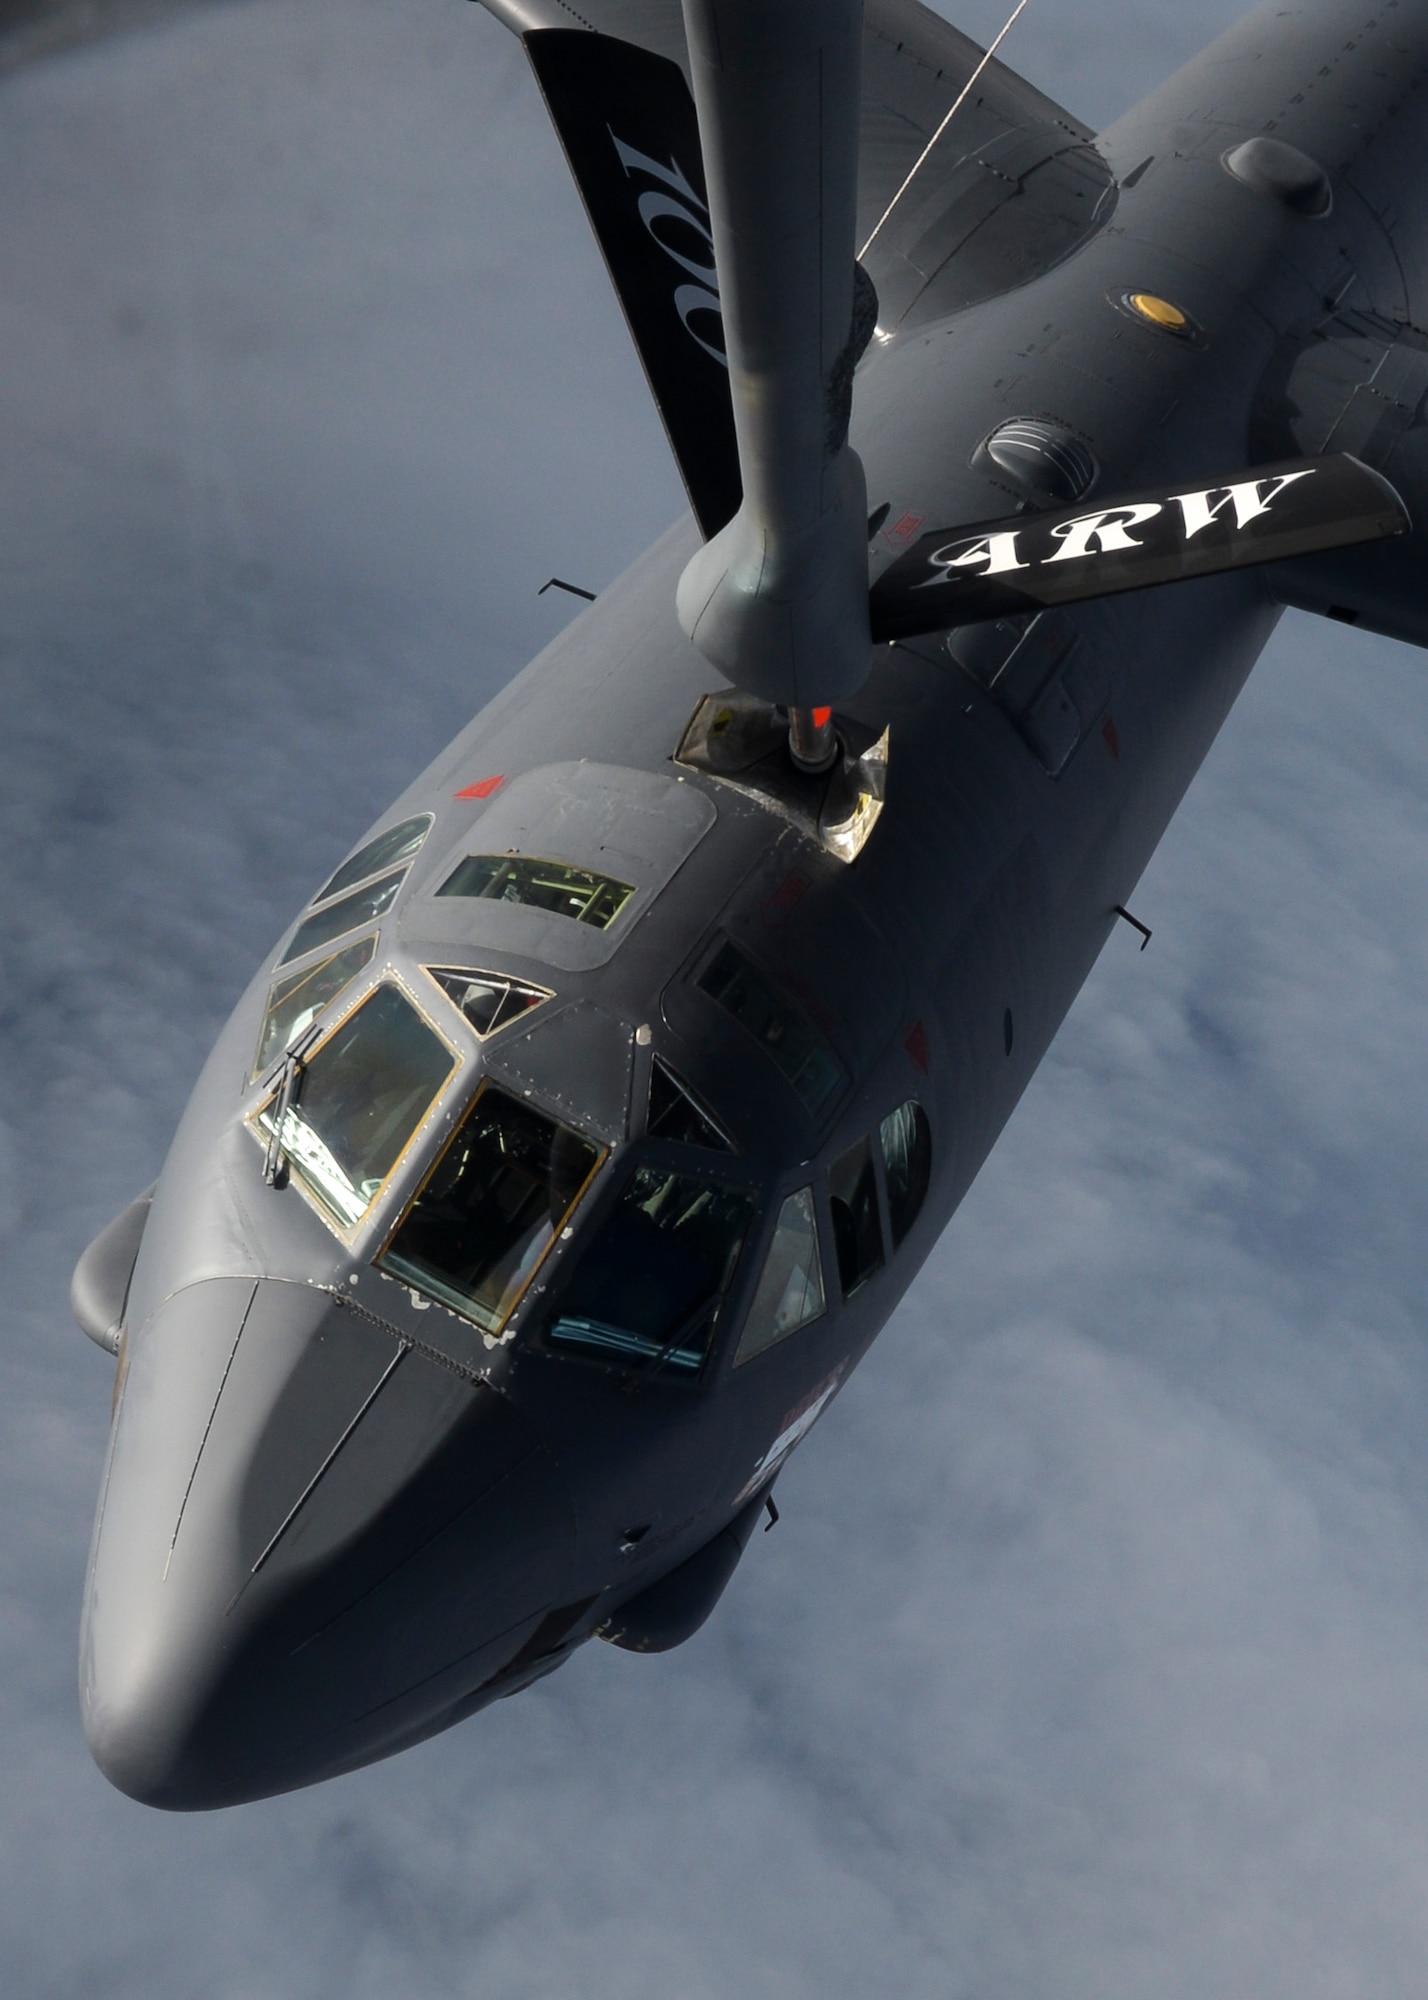 A B-52 Stratofortress from Barksdale Air Force Base, La., receives fuel from a KC-135 Stratotanker assigned to Royal Air Force Mildenhall, England, over the Trøndelag region of Norway, while participating in exercise Cold Response. The exercise featured maritime, land, and air operations to underscore NATO’s ability to defend against any threat in any environment. (U.S. Air Force photo/Senior Airman Victoria H. Taylor)